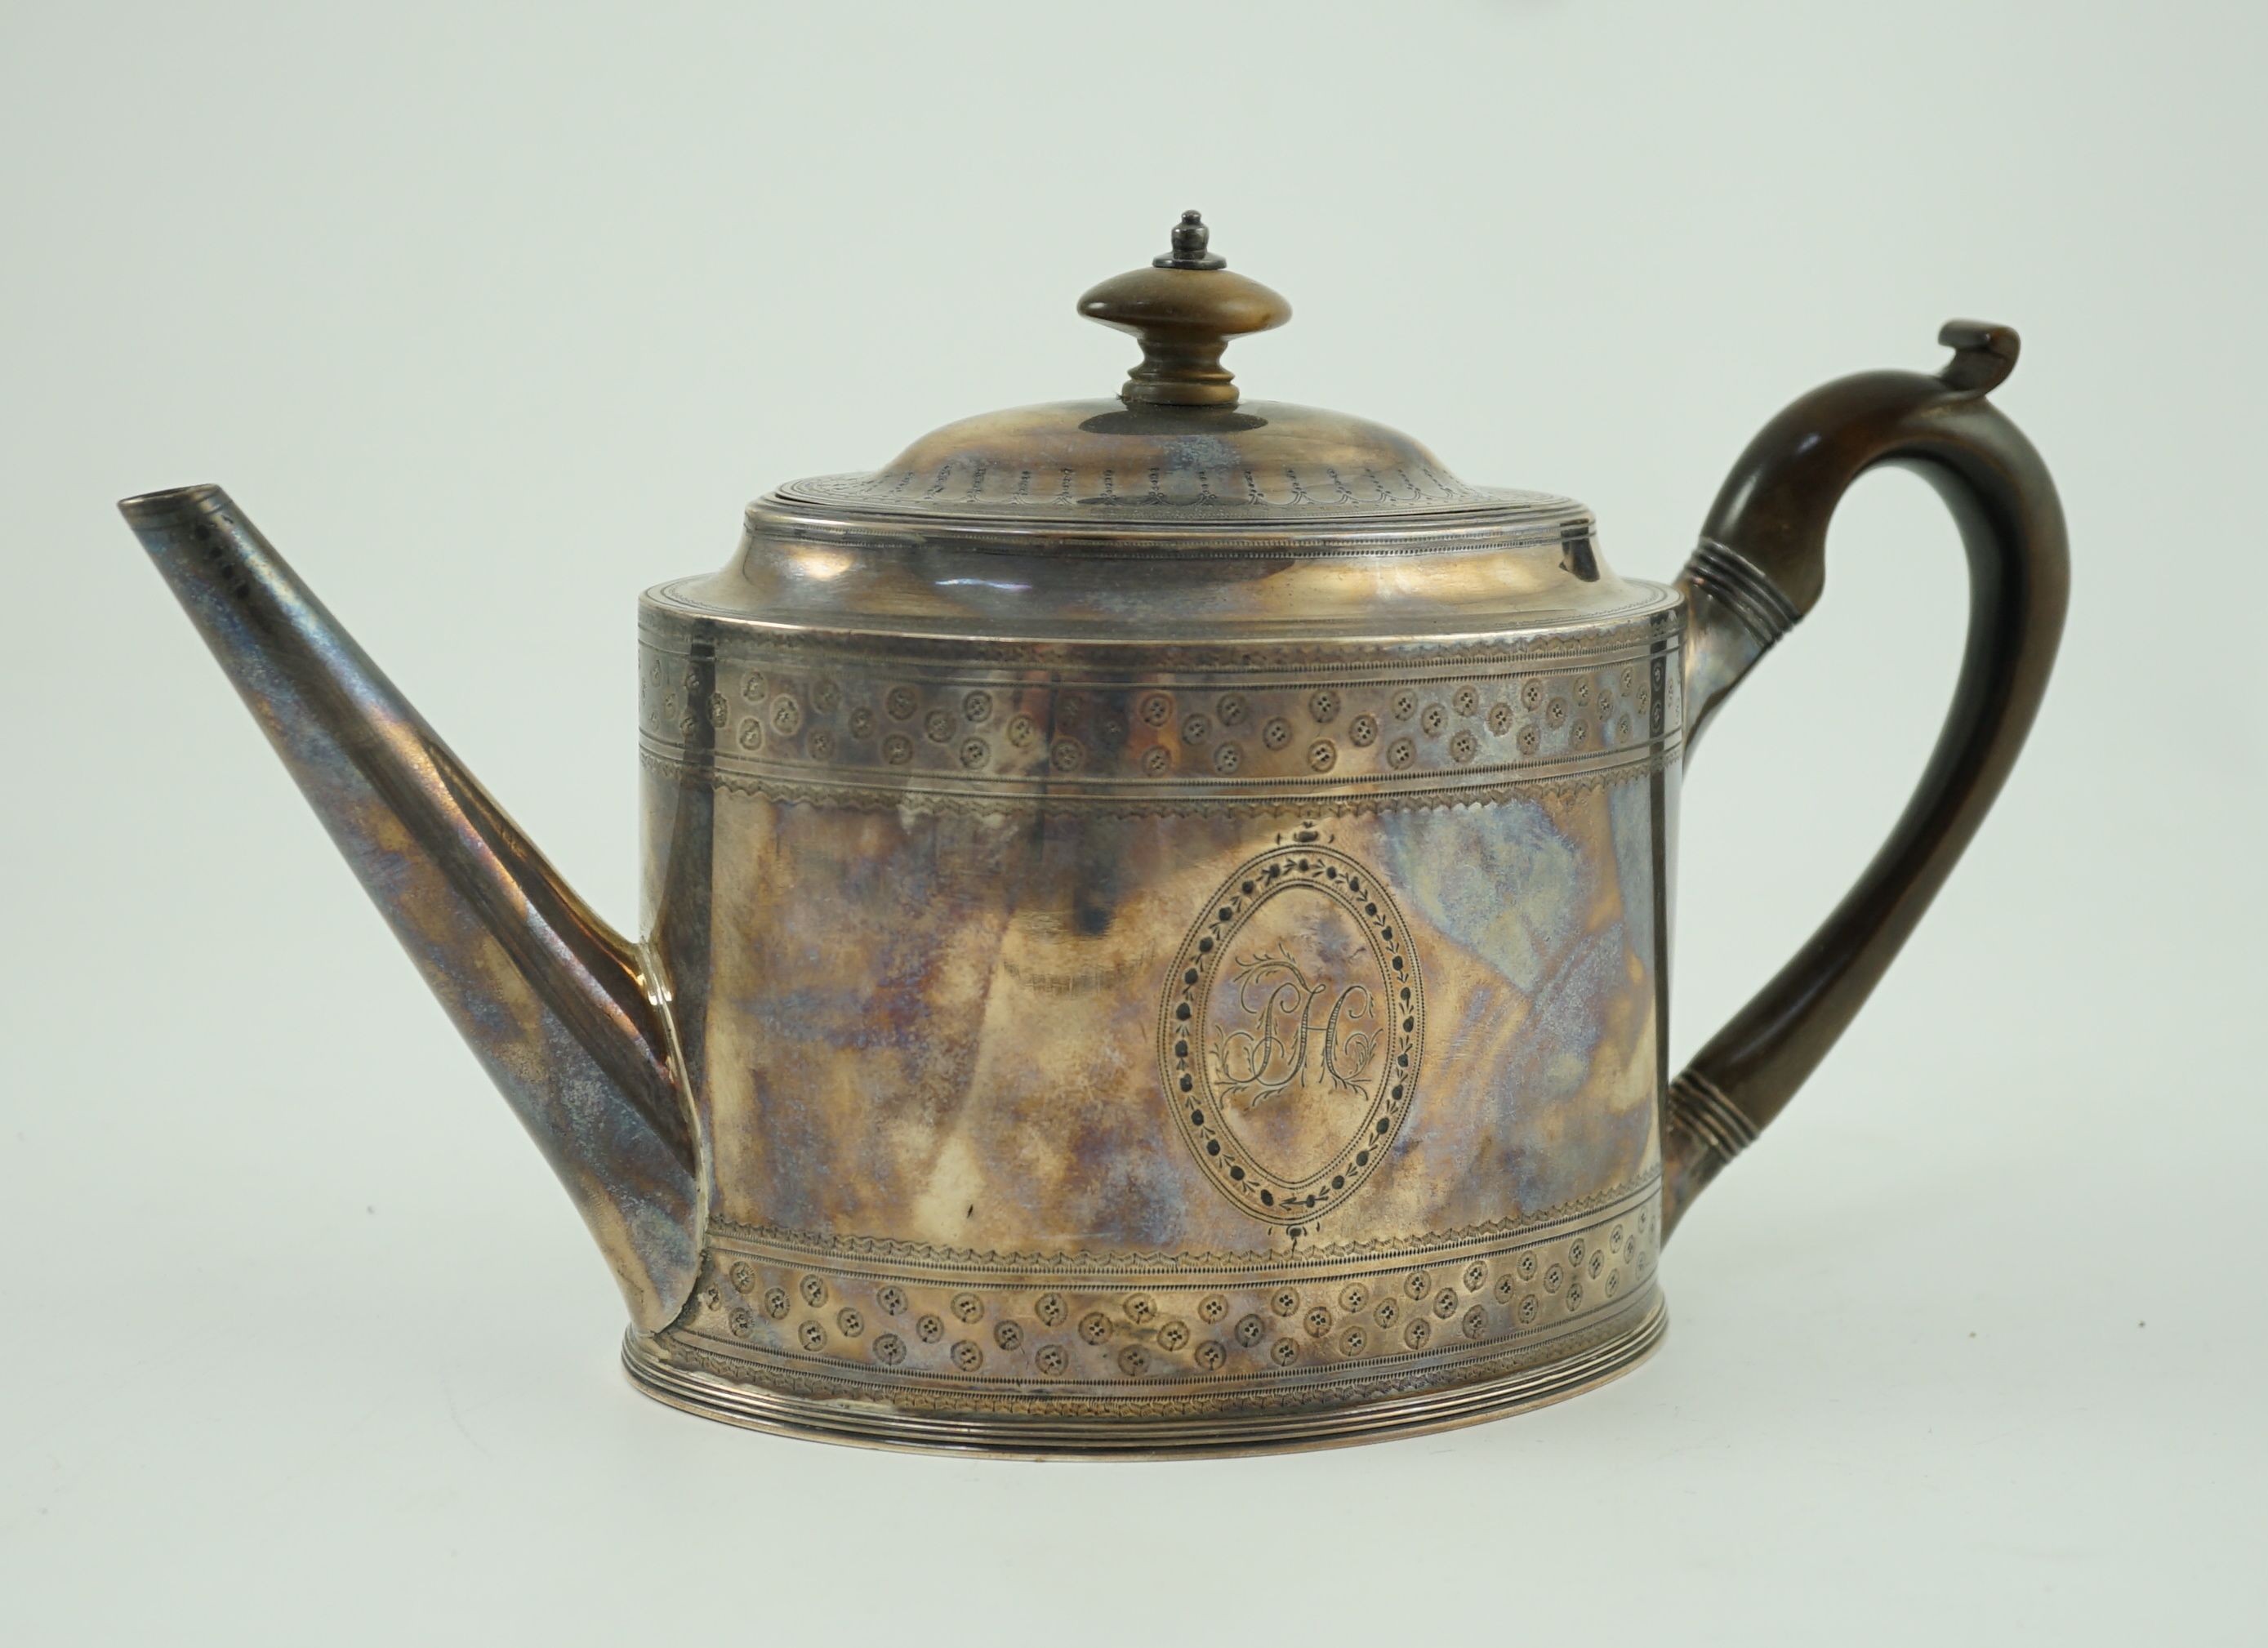 A George III silver oval teapot, by Hester Bateman